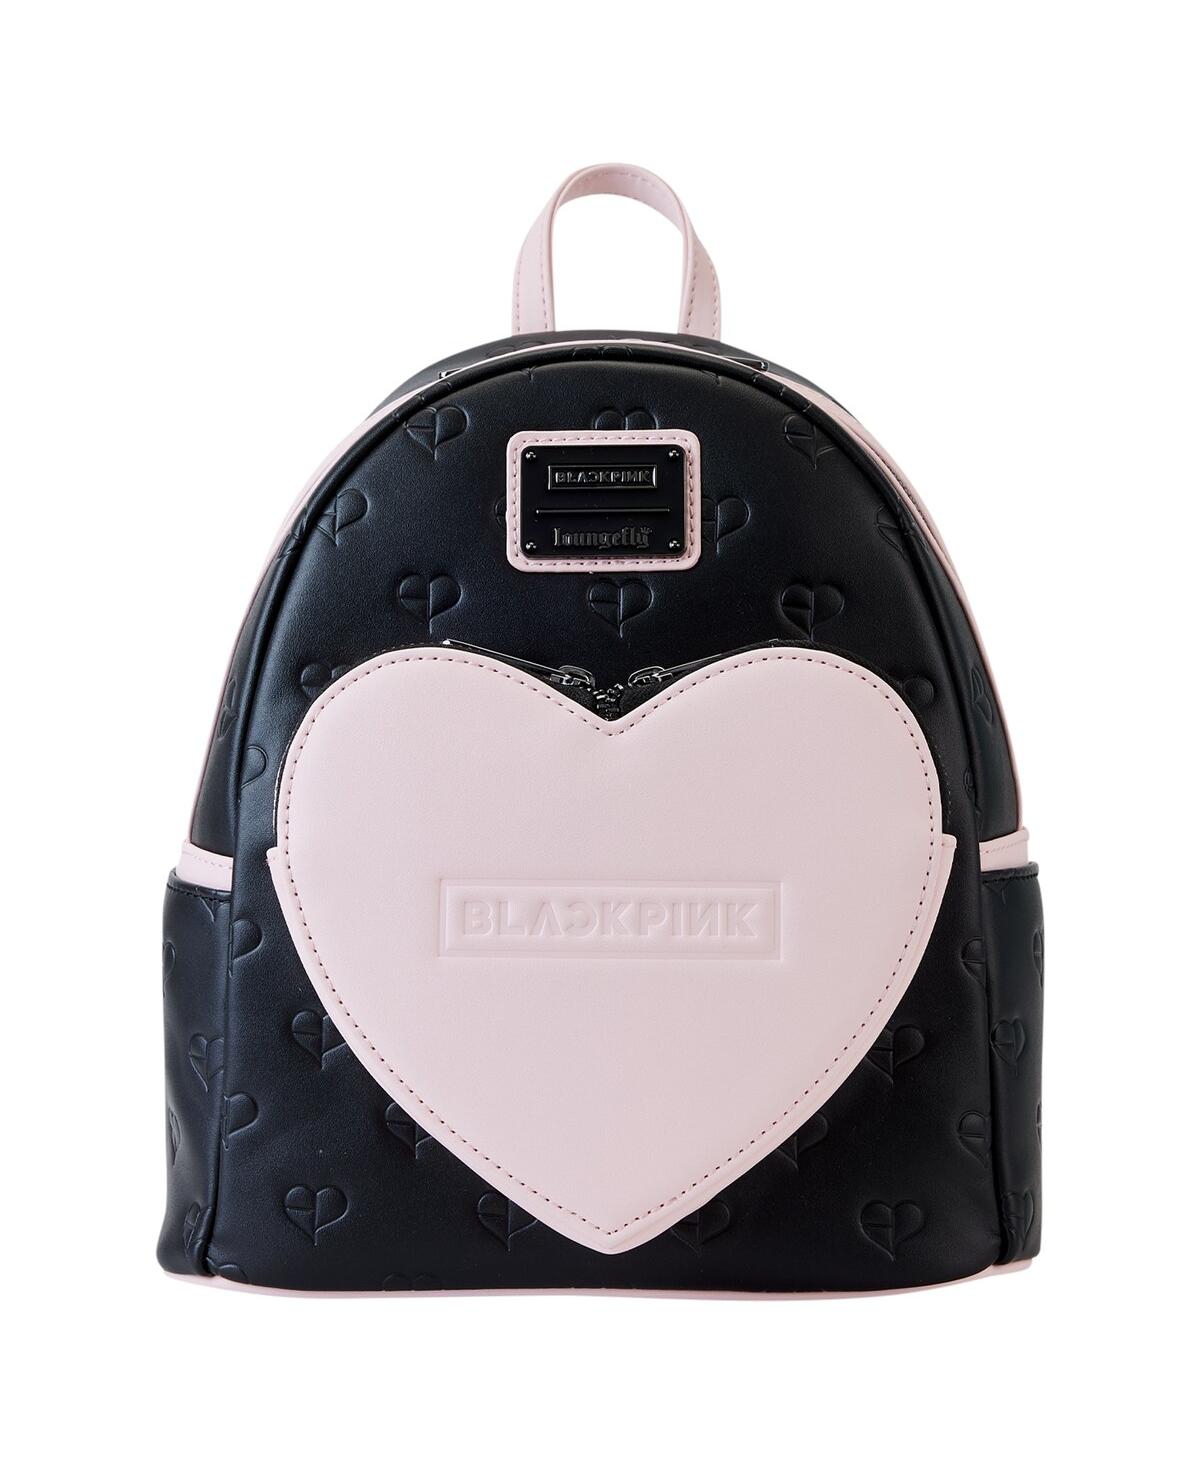 Men's and Women's Loungefly Blackpink Allover Print Heart Mini Backpack - Black